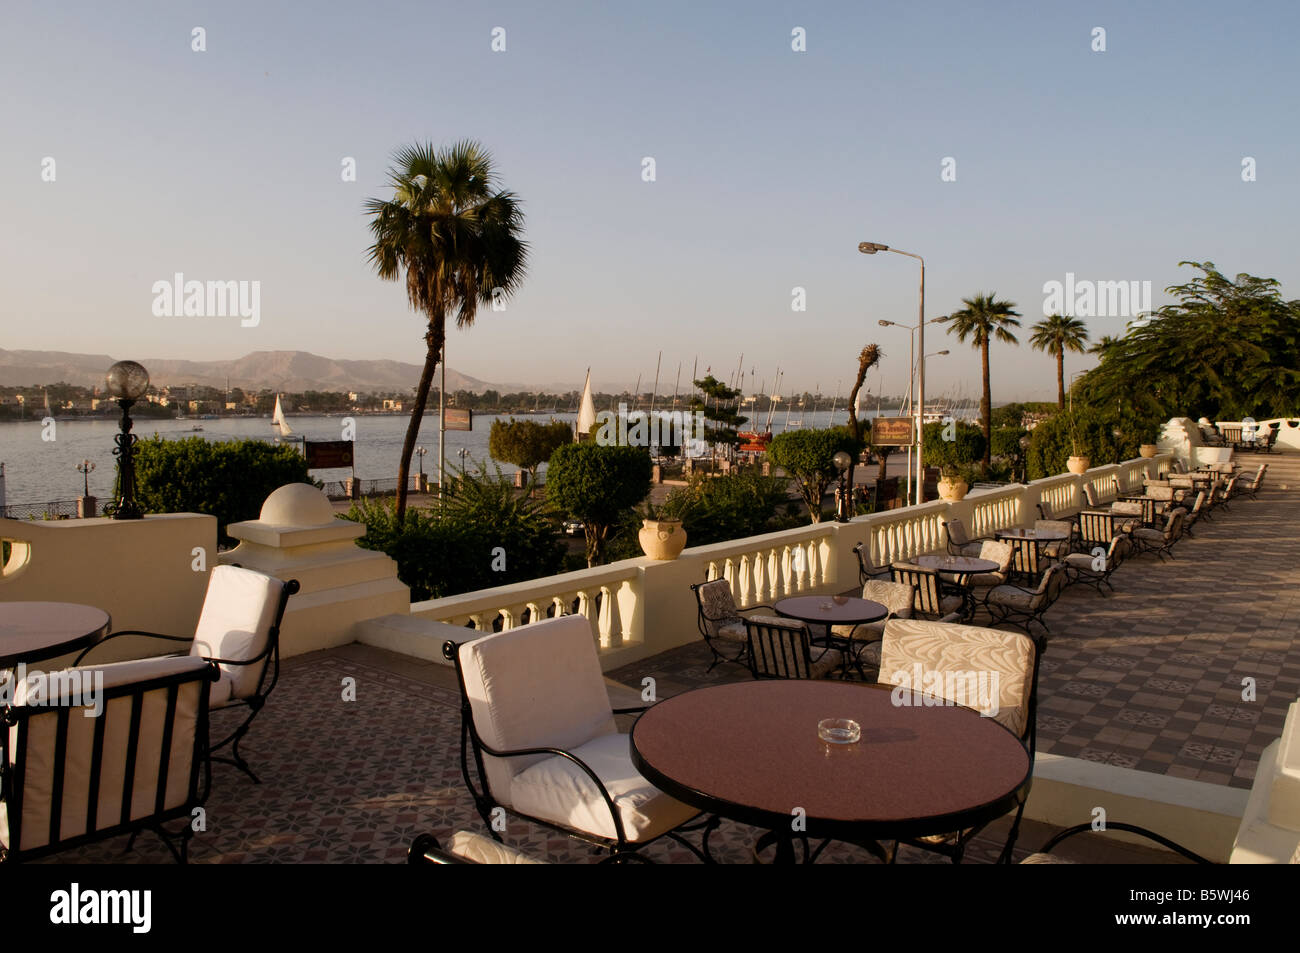 View of the Nile river from the terrace of the Colonial-style Sofitel Winter Palace Hotel built in19th century in the city of Luxor Southern Egypt Stock Photo